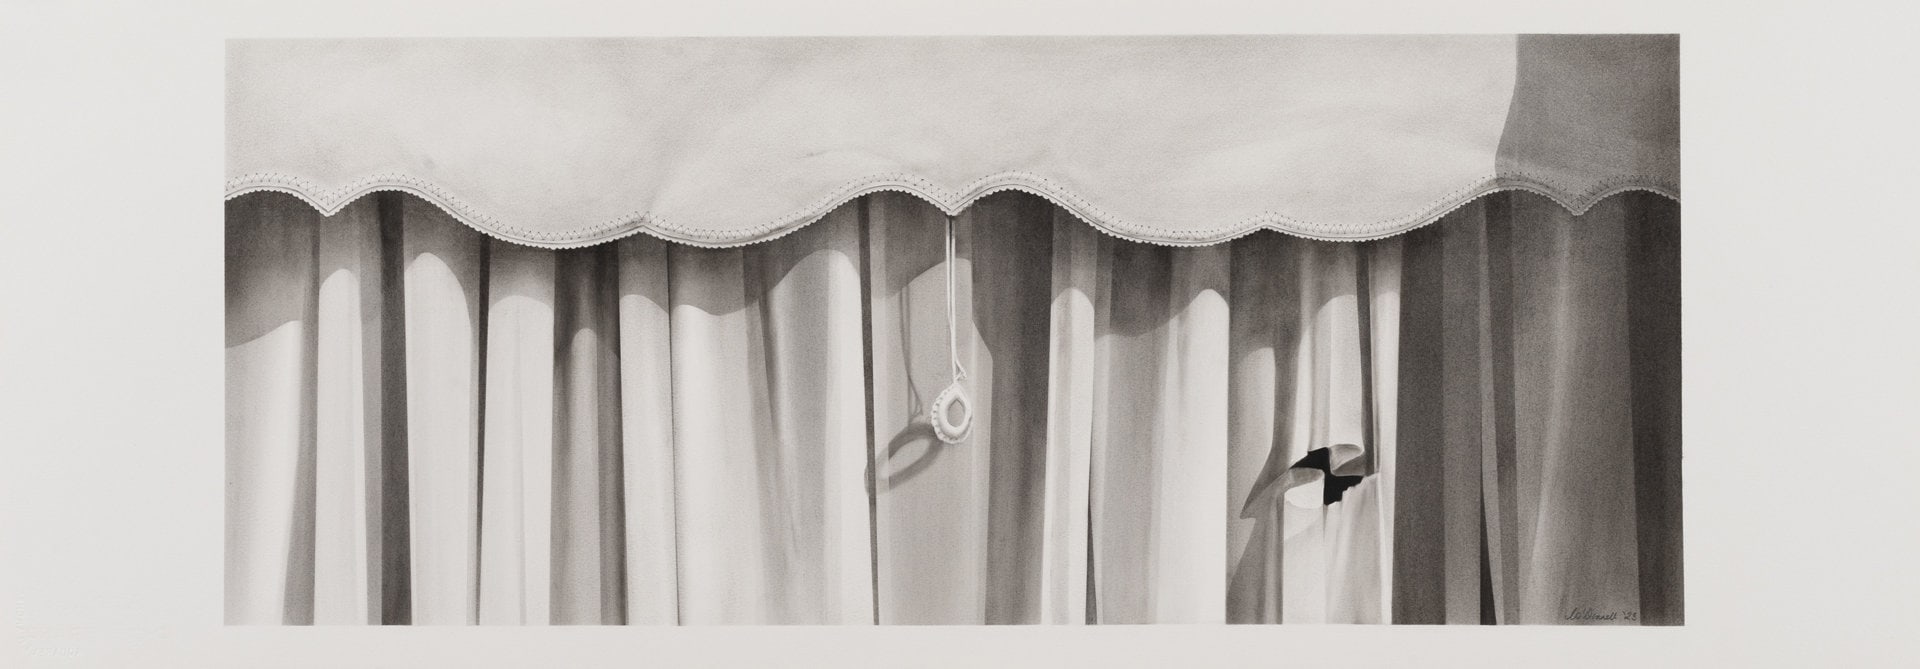 ‘Waiting’, 2023, charcoal on paper, 60 x 102 cm, unframed